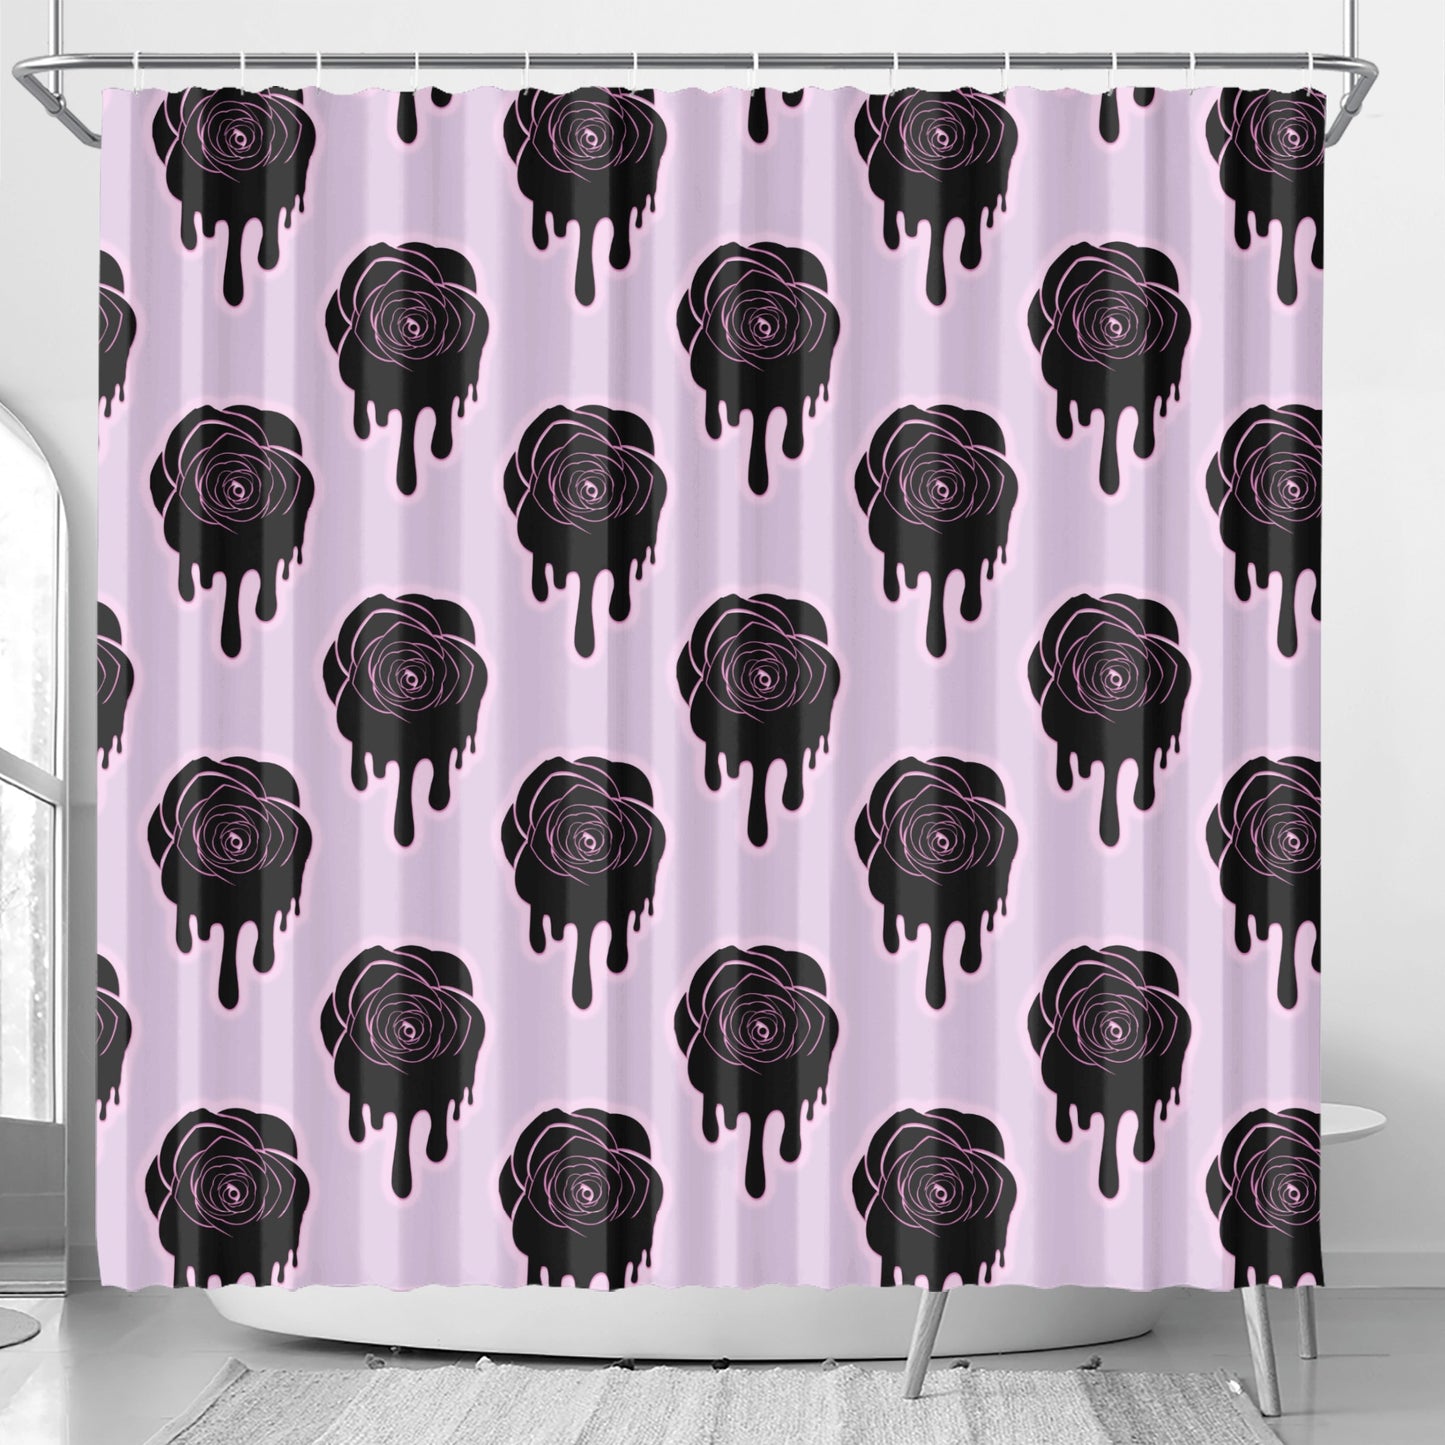 Black Dripping Rose Shower Curtain